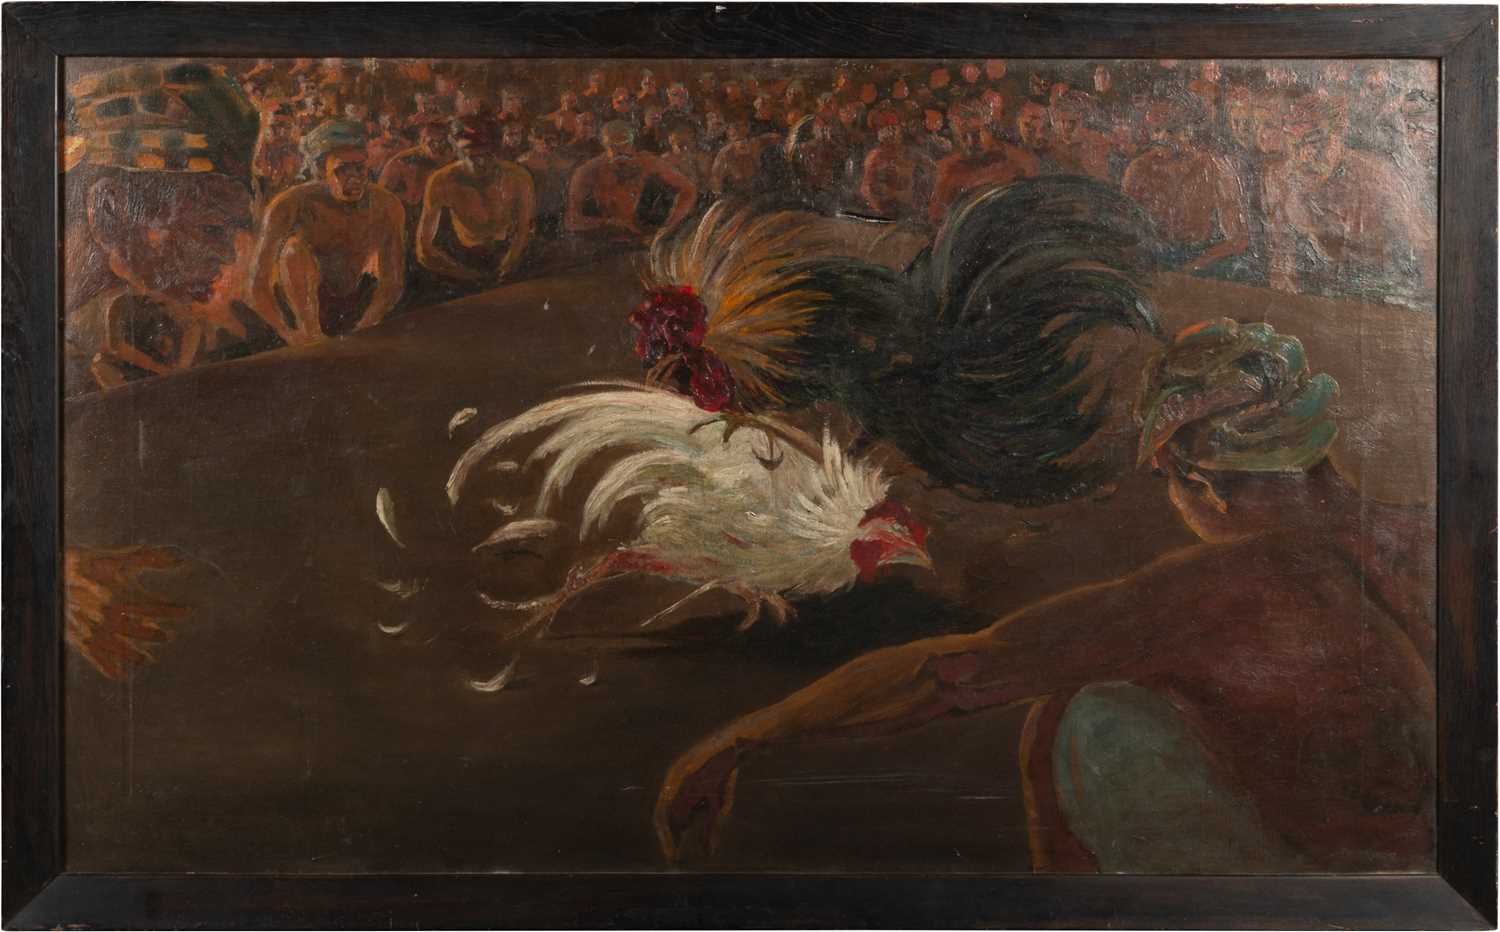 D DRIESE(?) (20TH CENTURY SCHOOL) COCK FIGHTING, SOUTH EAST ASIA